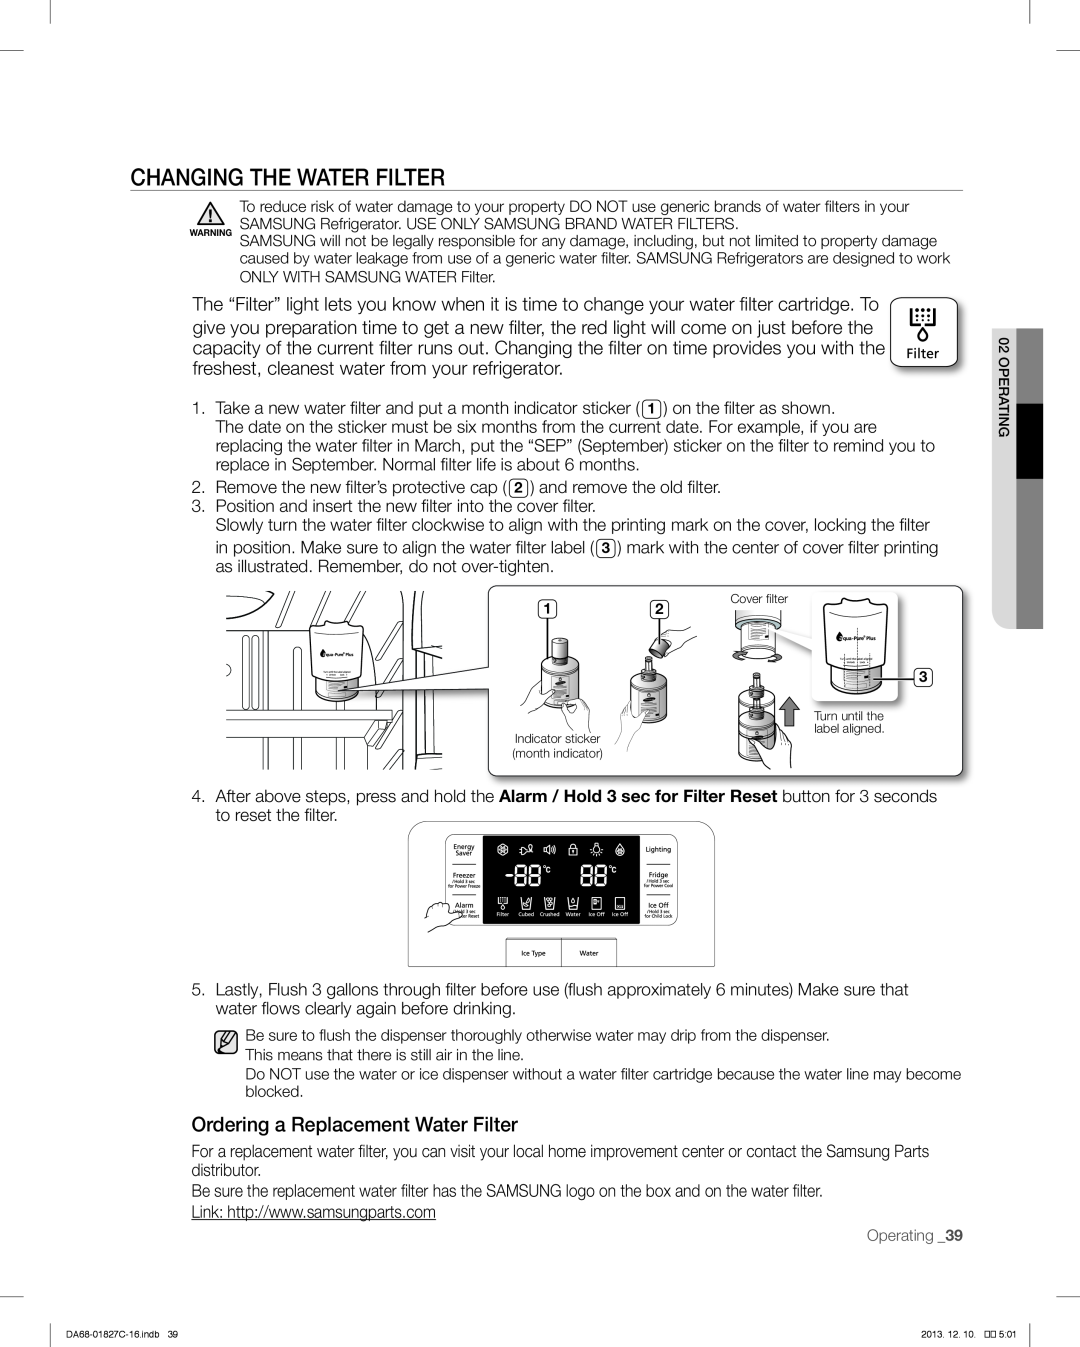 Samsung RFG237AARS user manual Changing The Water Filter, Ordering a Replacement Water Filter 